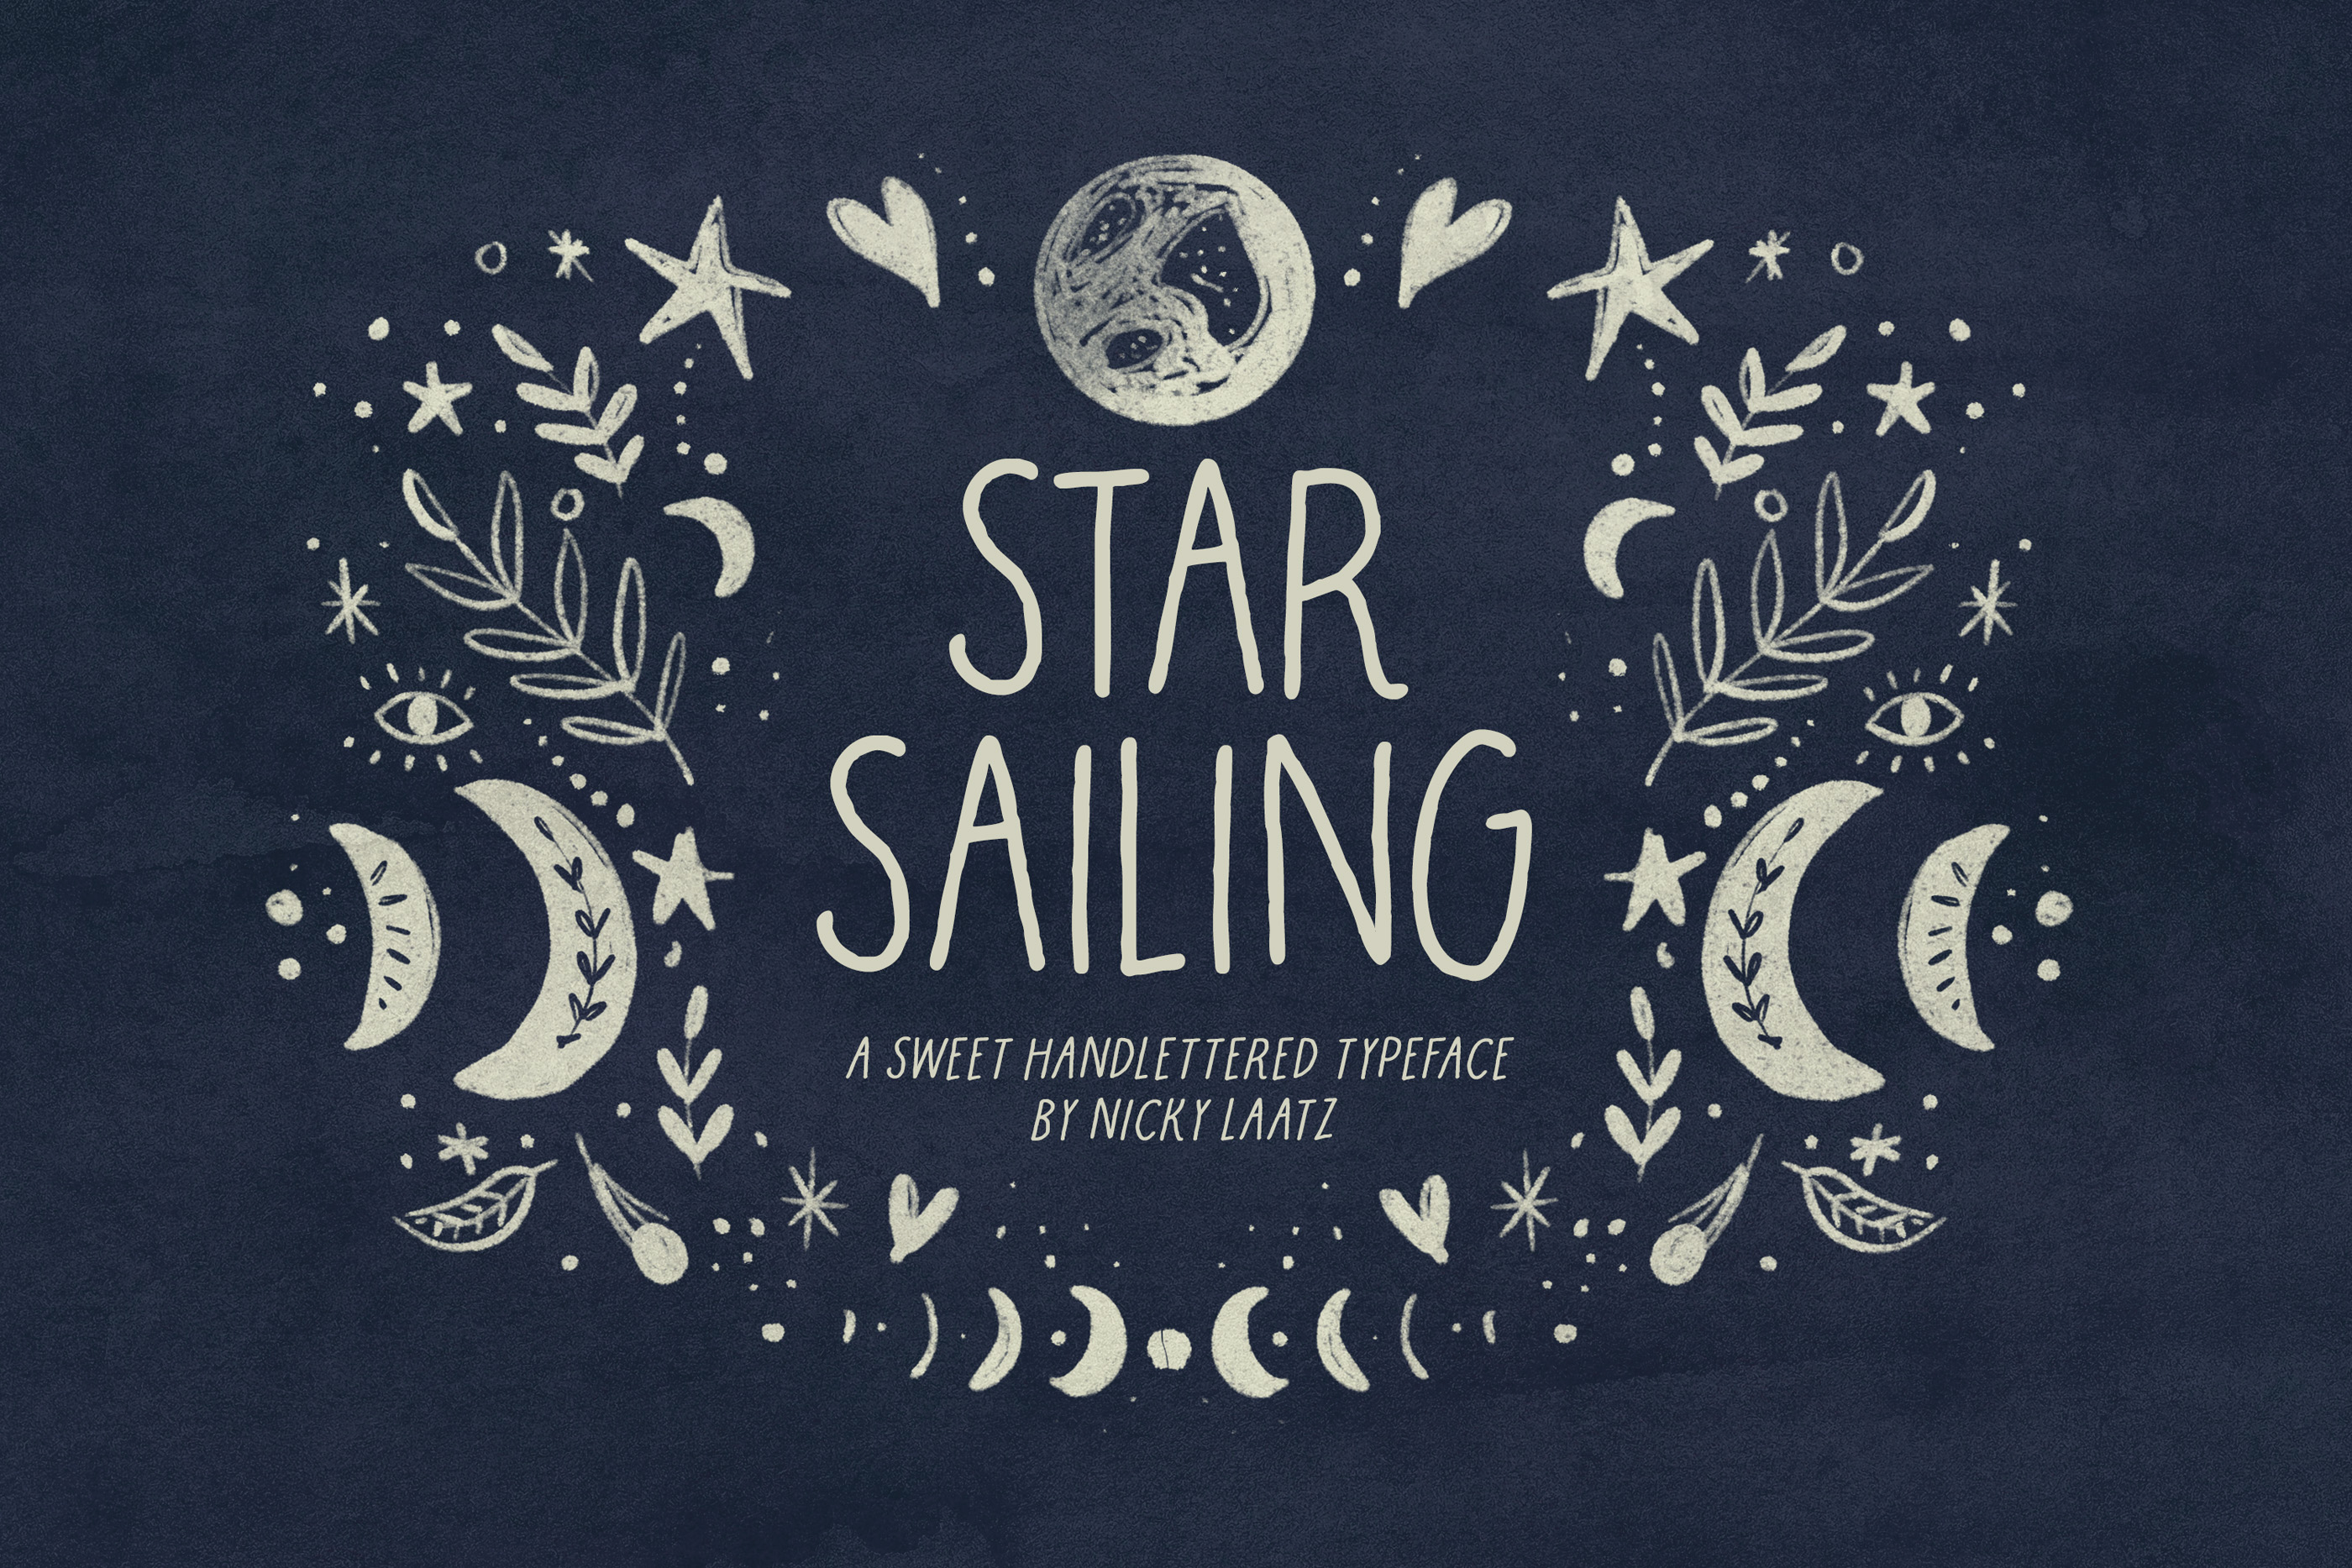 Star Sailing Typeface (Font) by Nicky Laatz